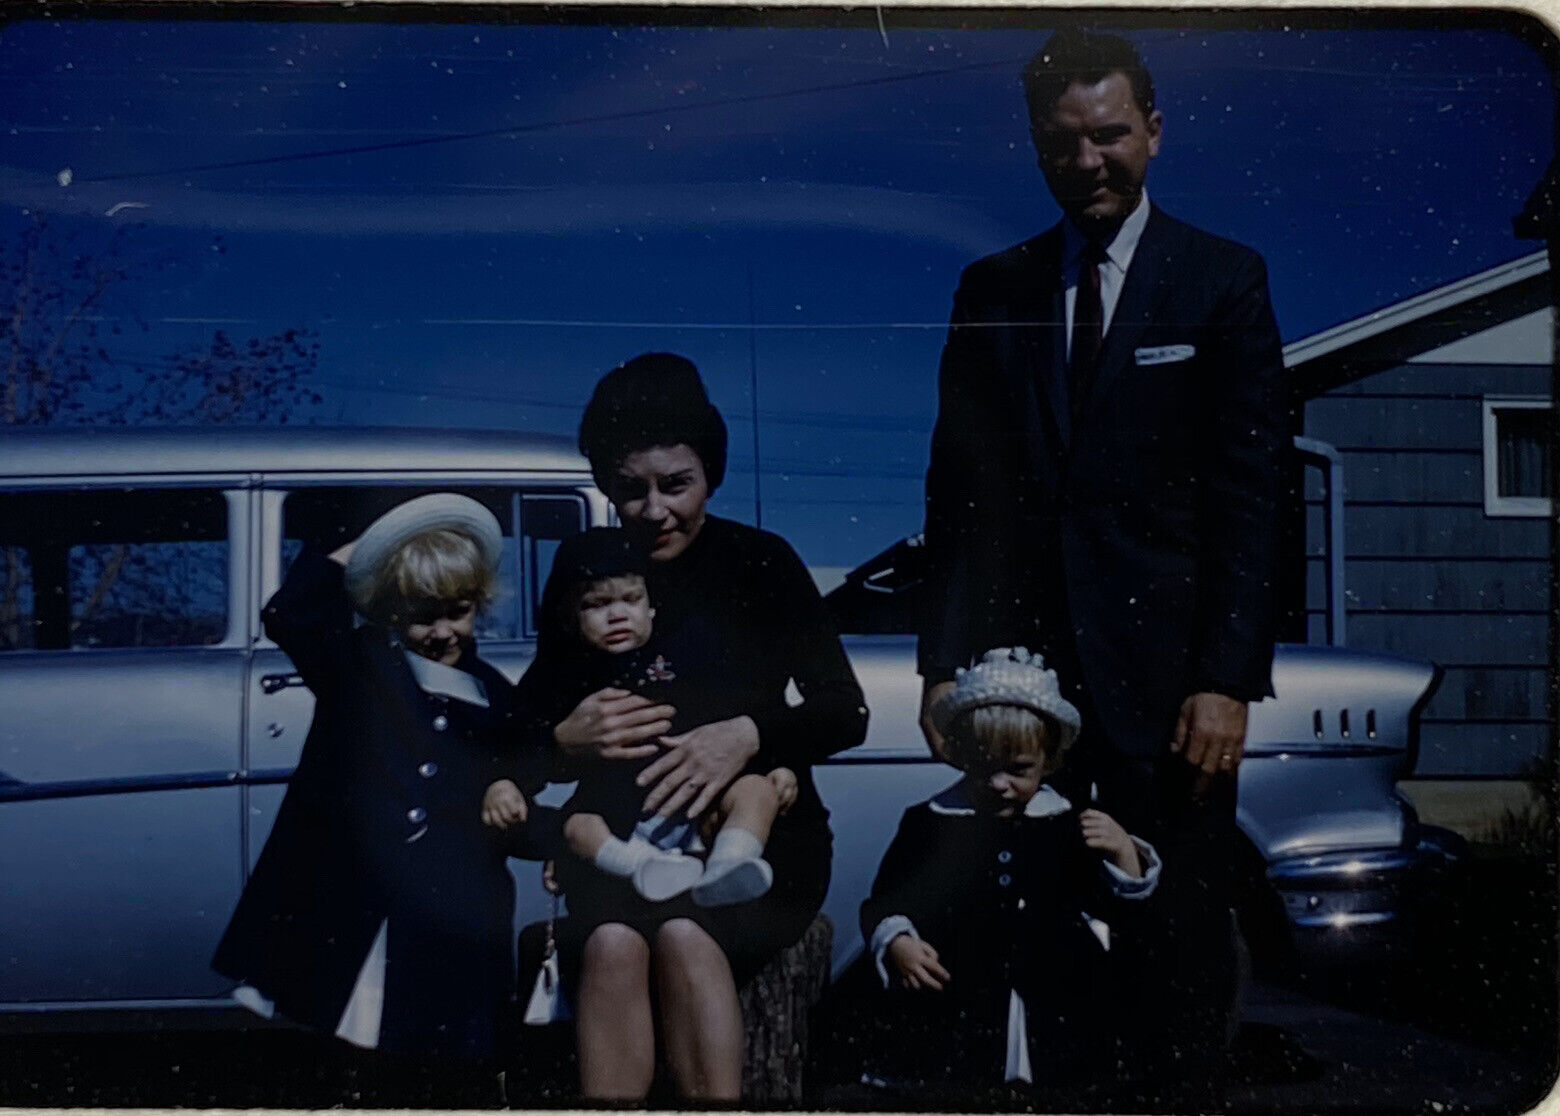 Vintage Slide 1963 Family Well Dressed Posed With Car